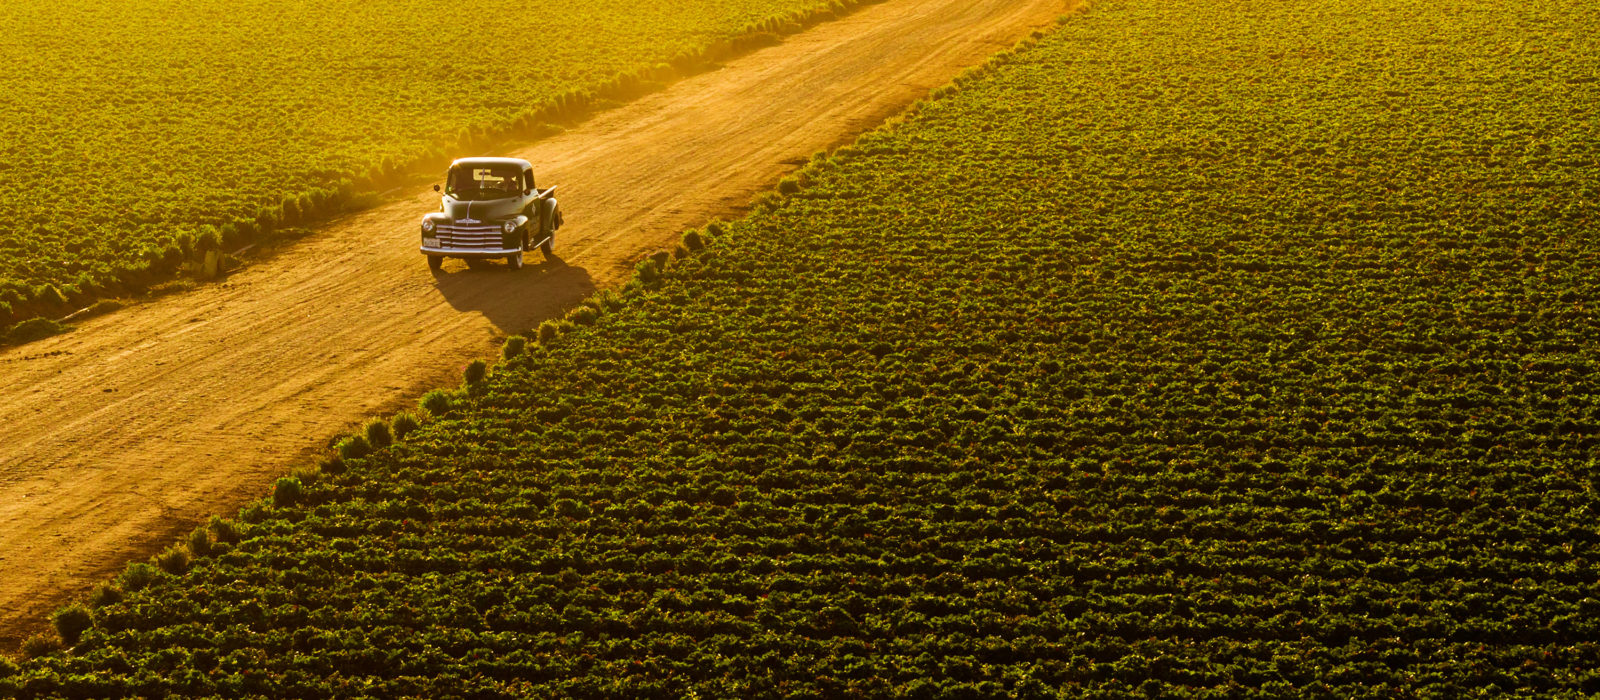 American AgCredit truck on dirt road next to road crops at dusk